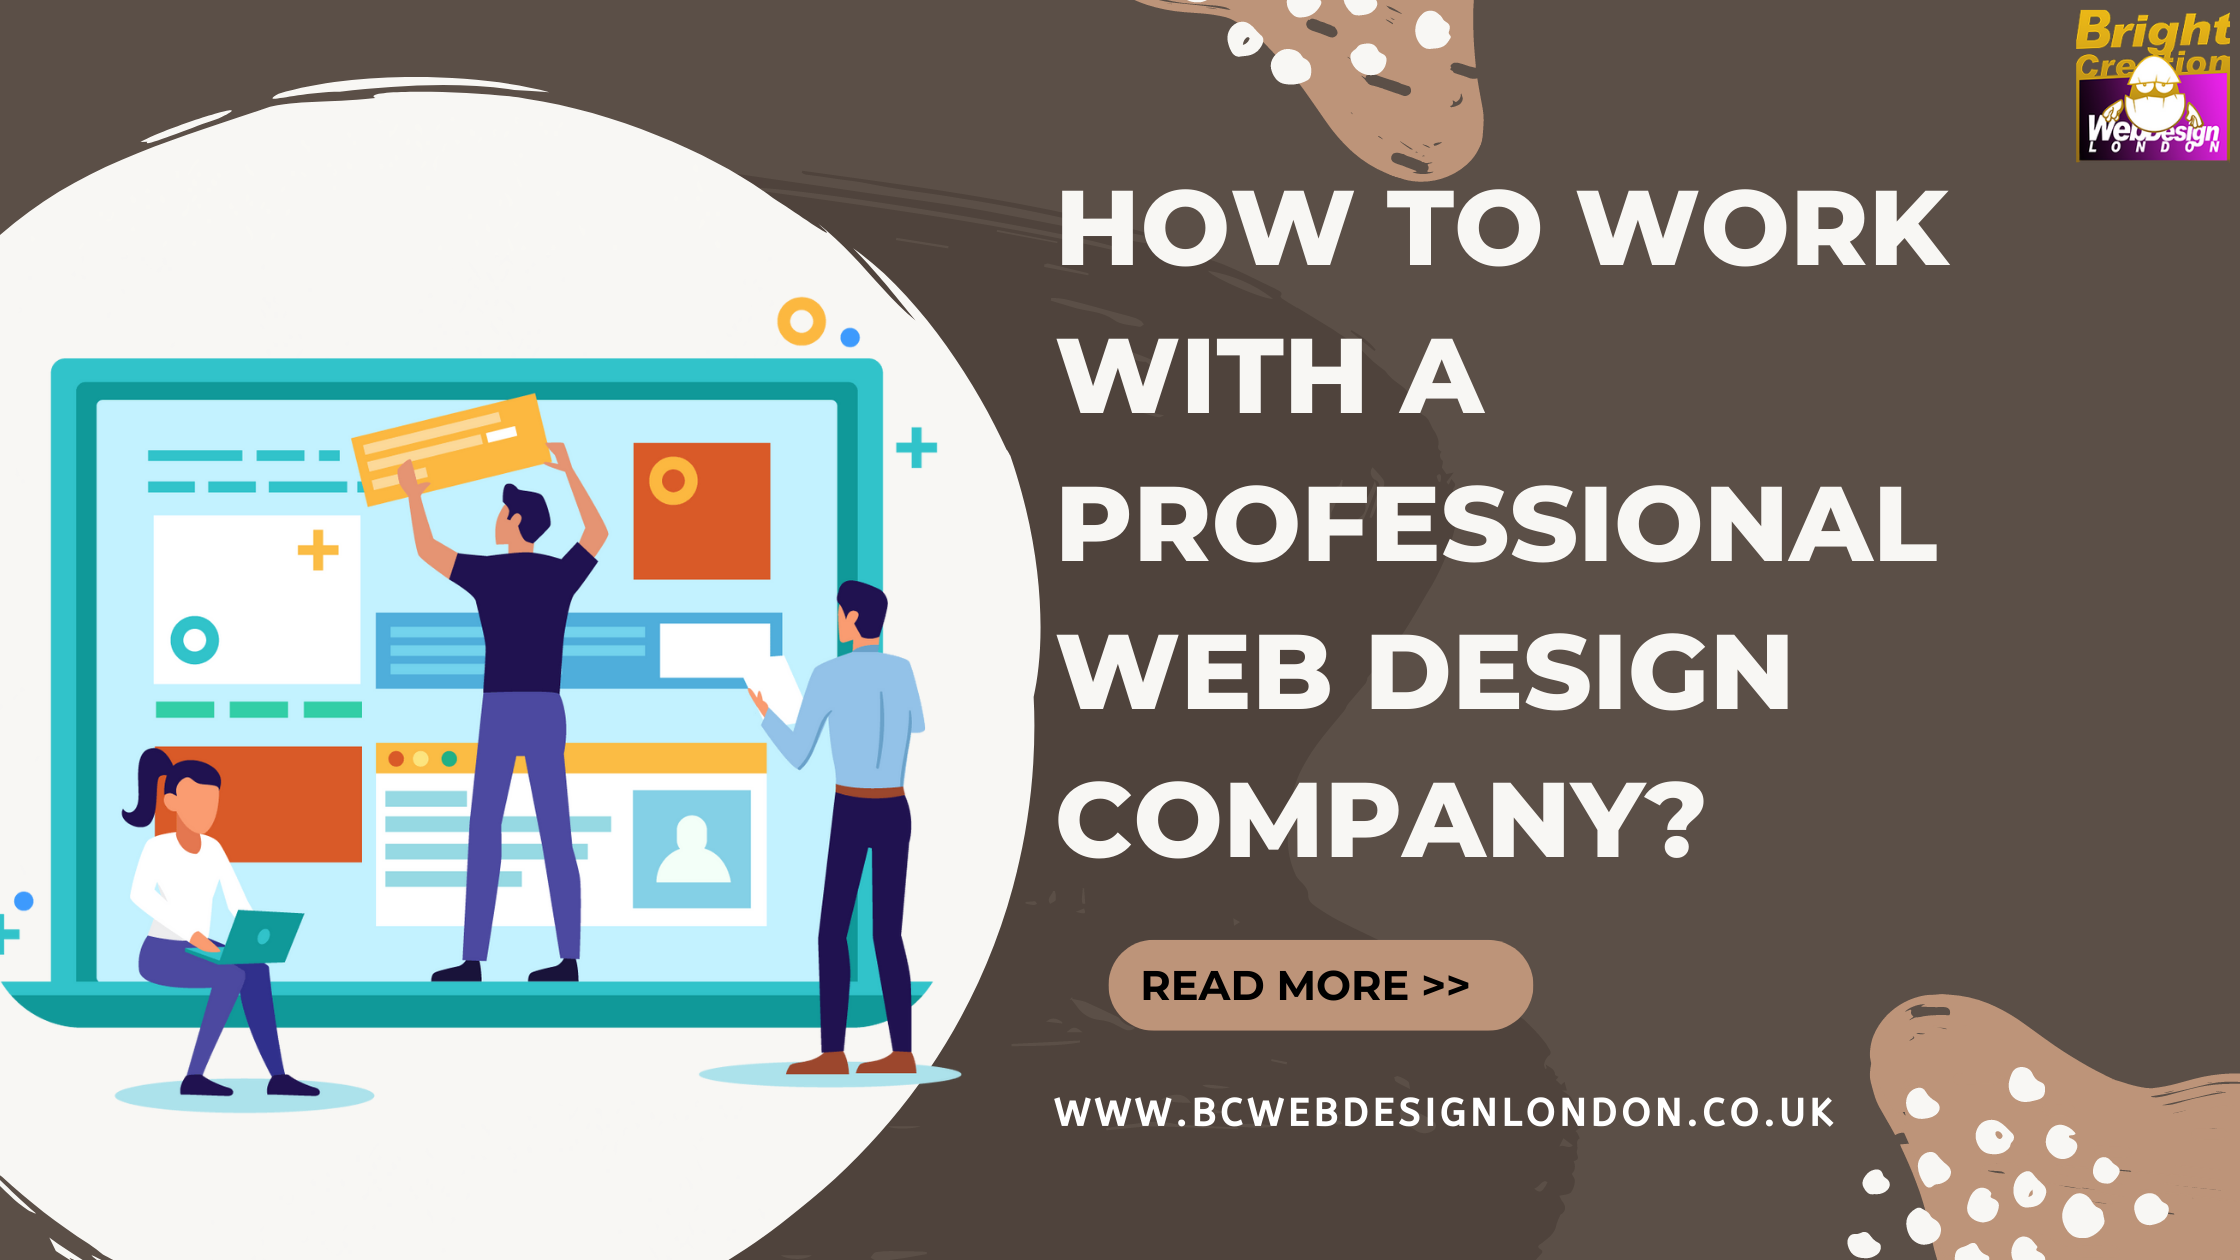 How to Work With a Professional Web Design Company?